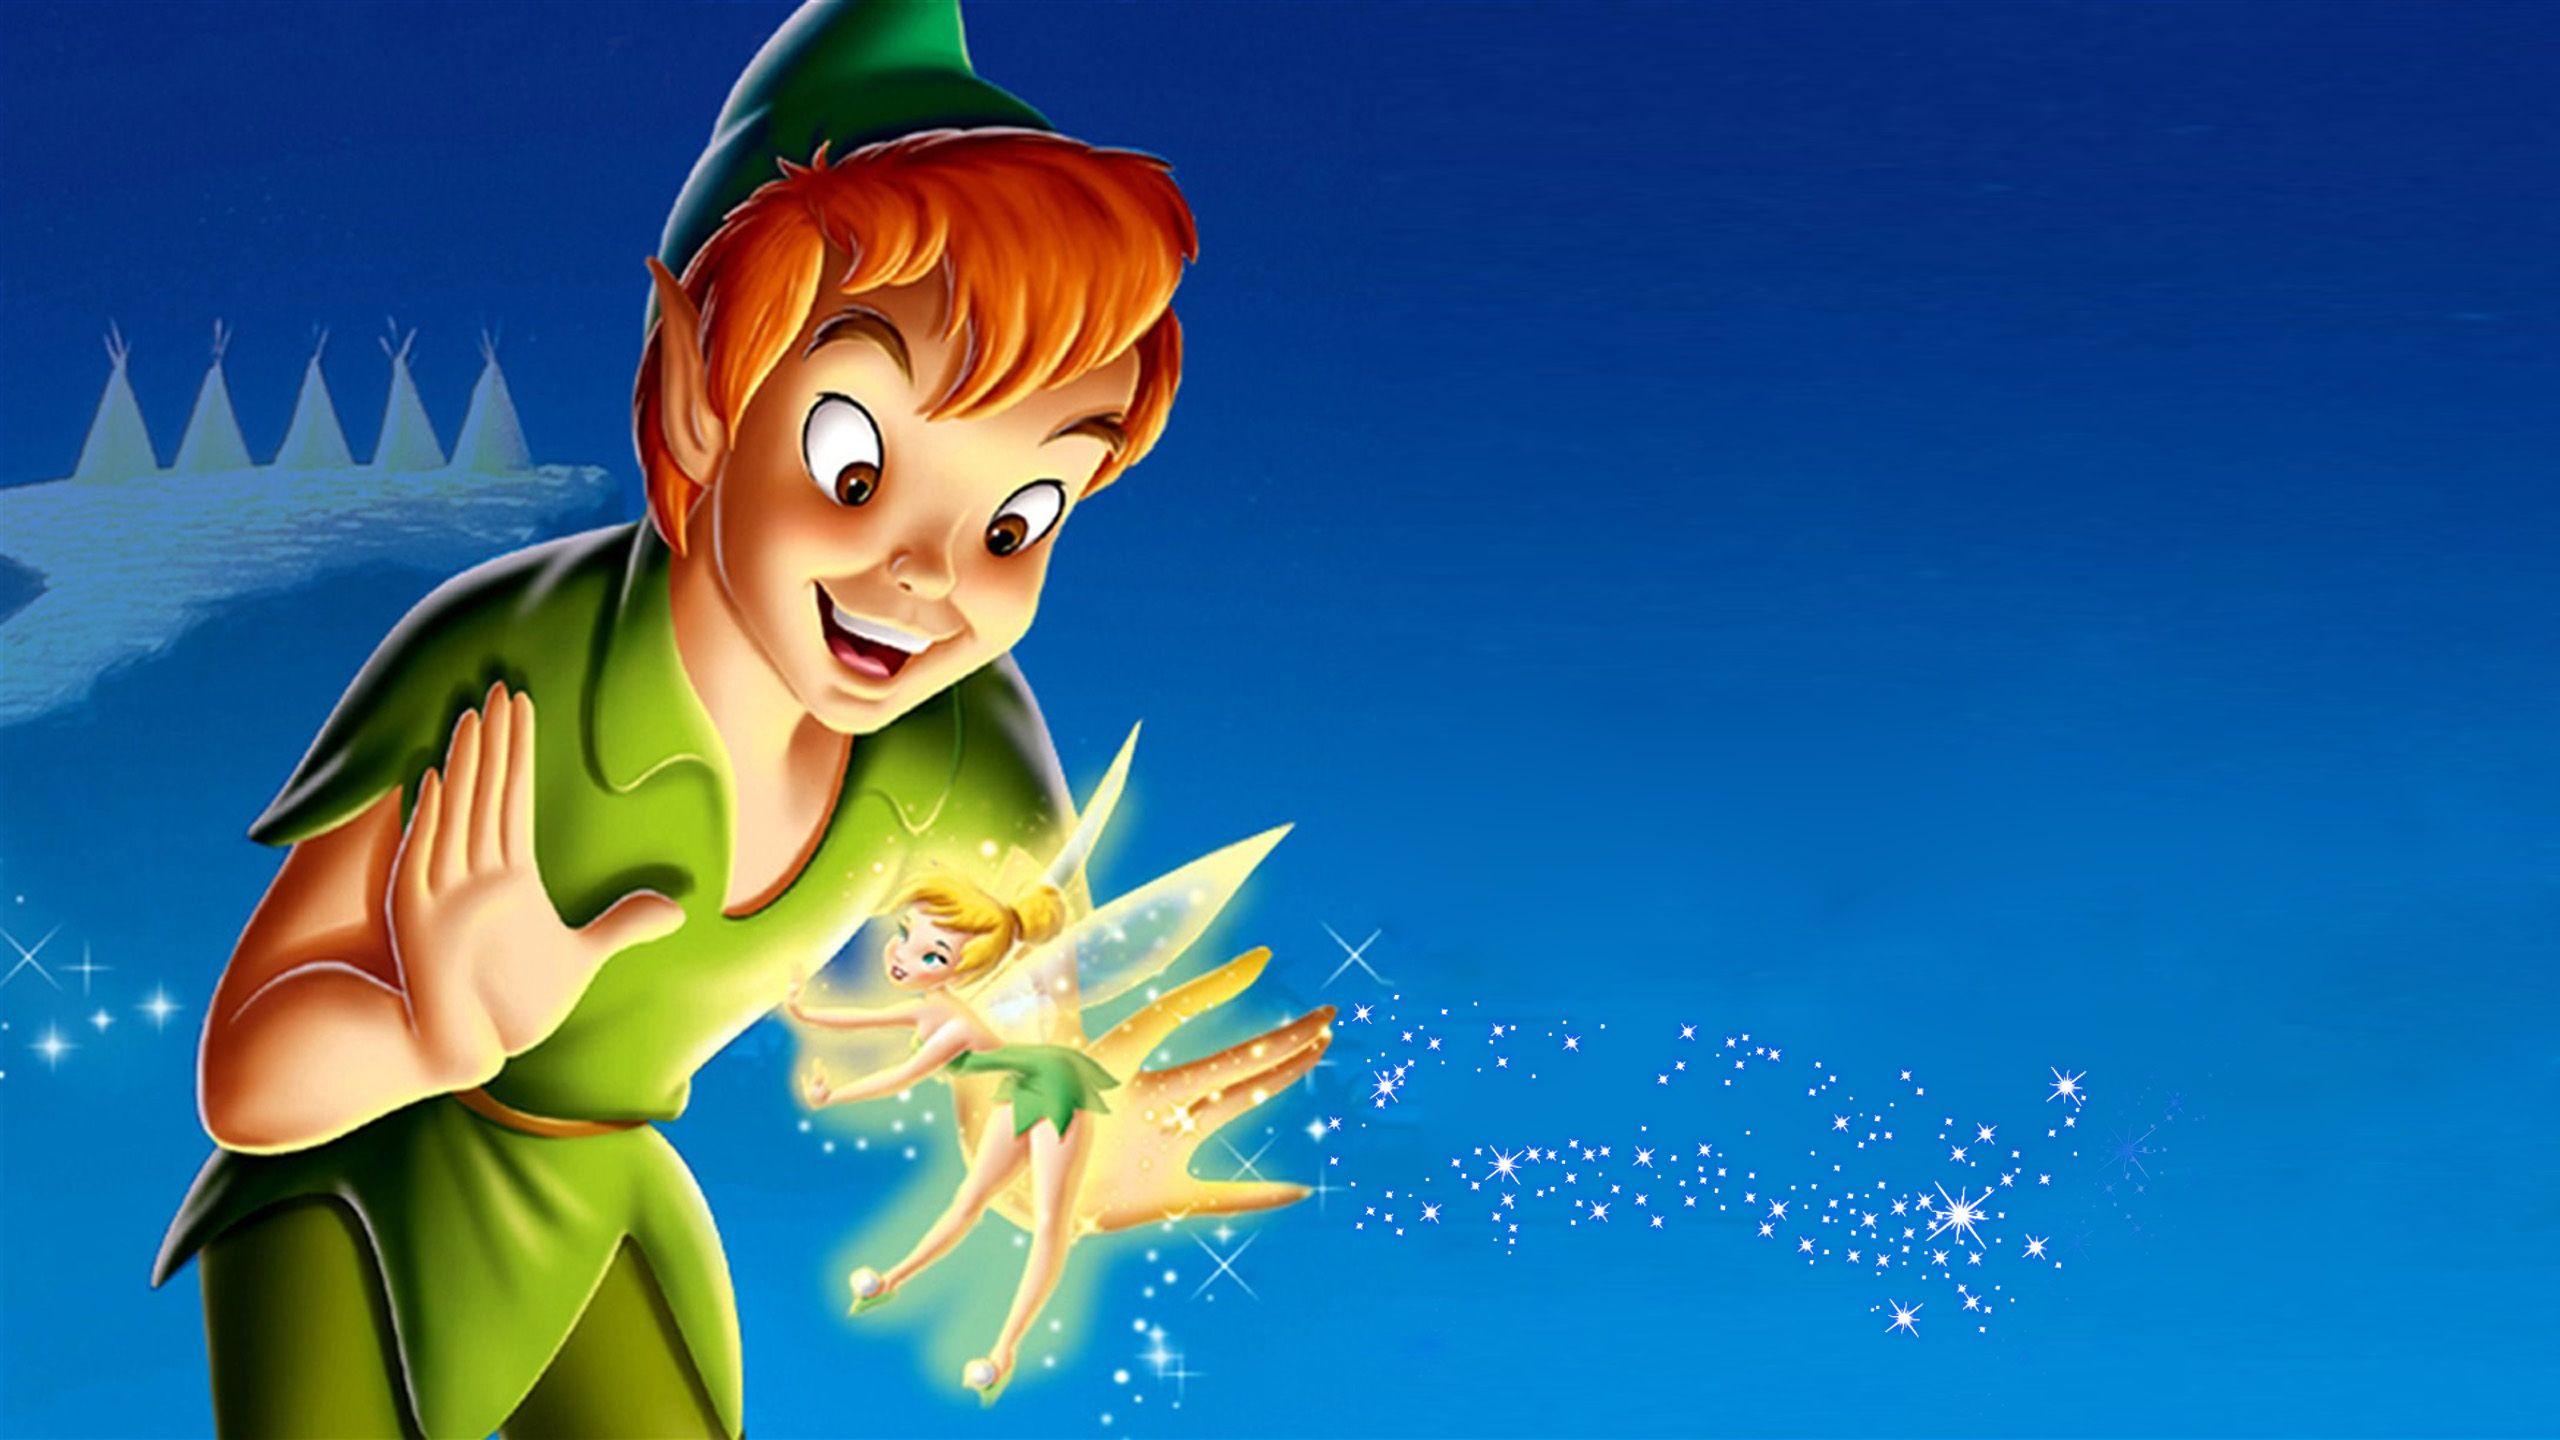 Tinkerbell Wallpapers Top Free Tinkerbell Backgrounds Images, Photos, Reviews